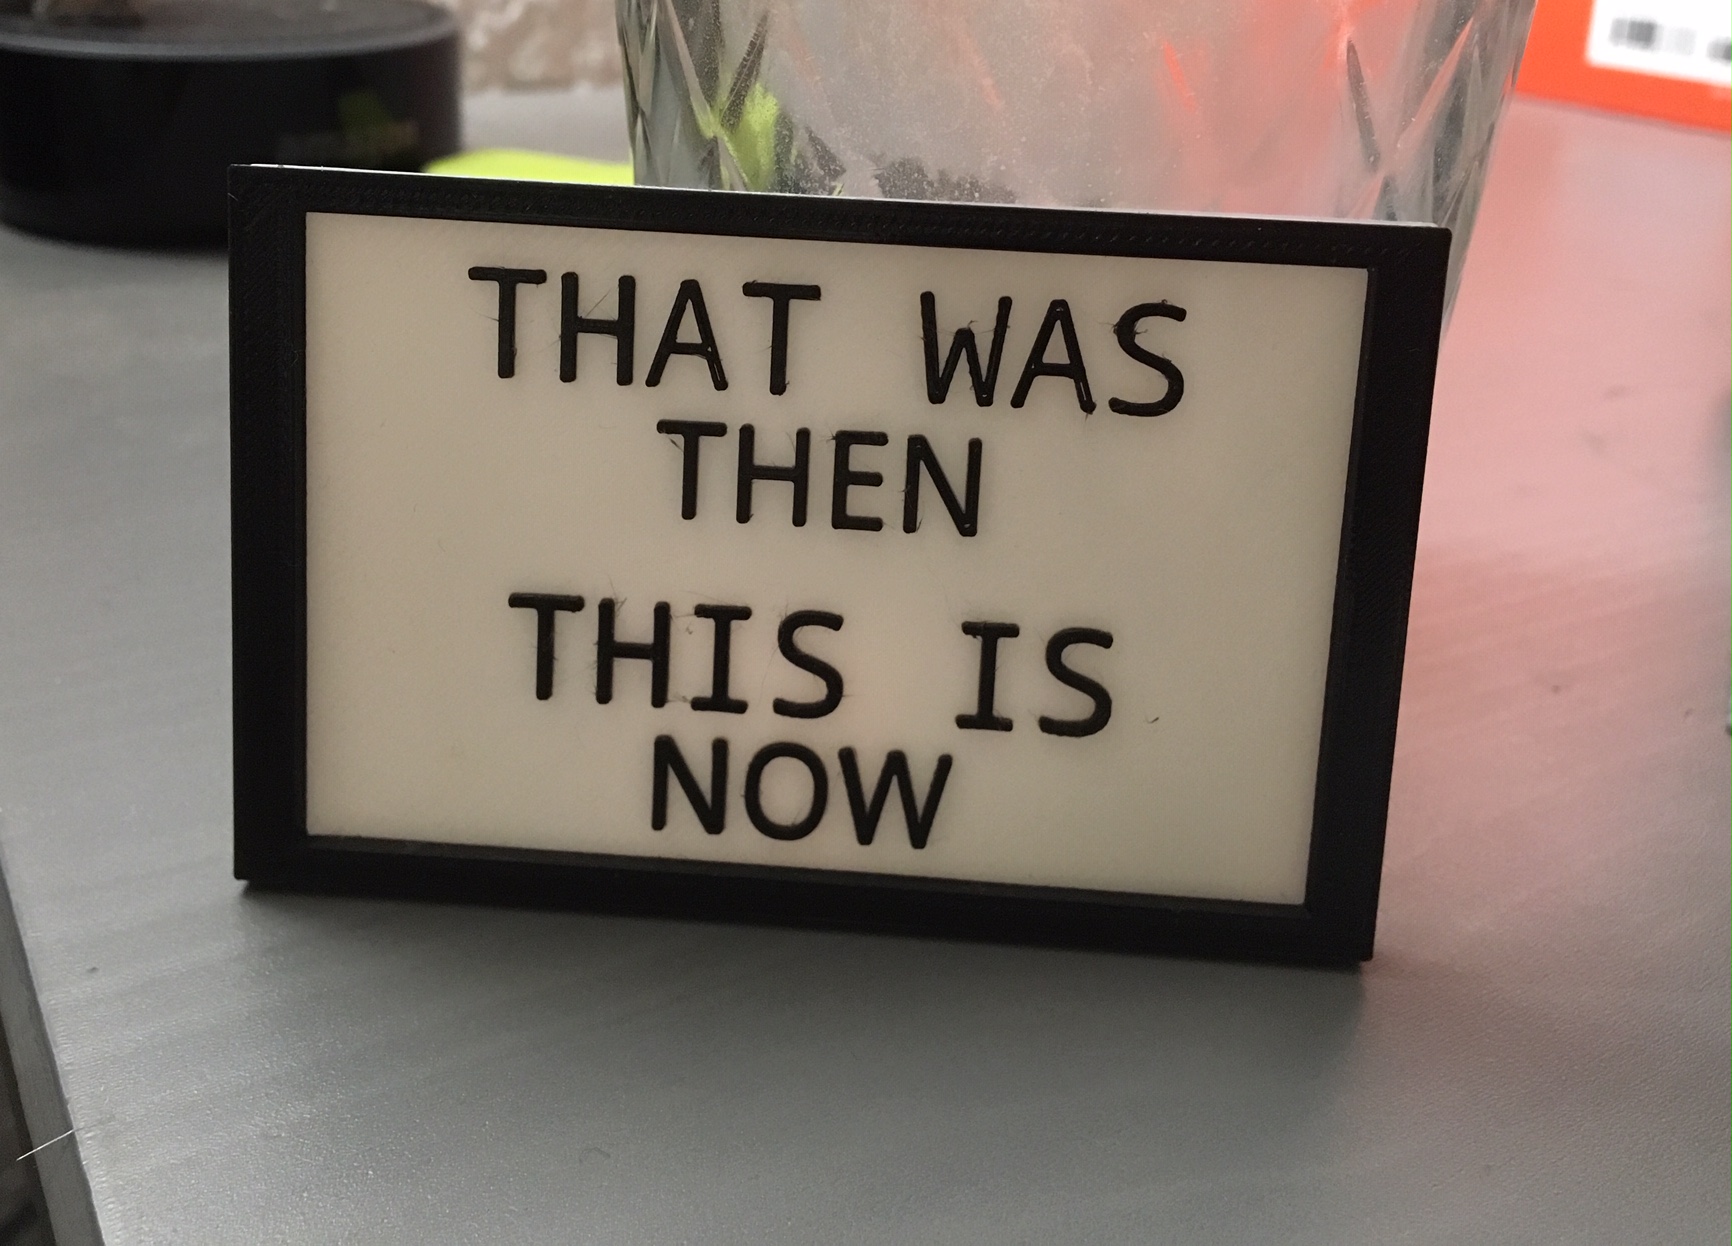 "That was then this is now" plate sign